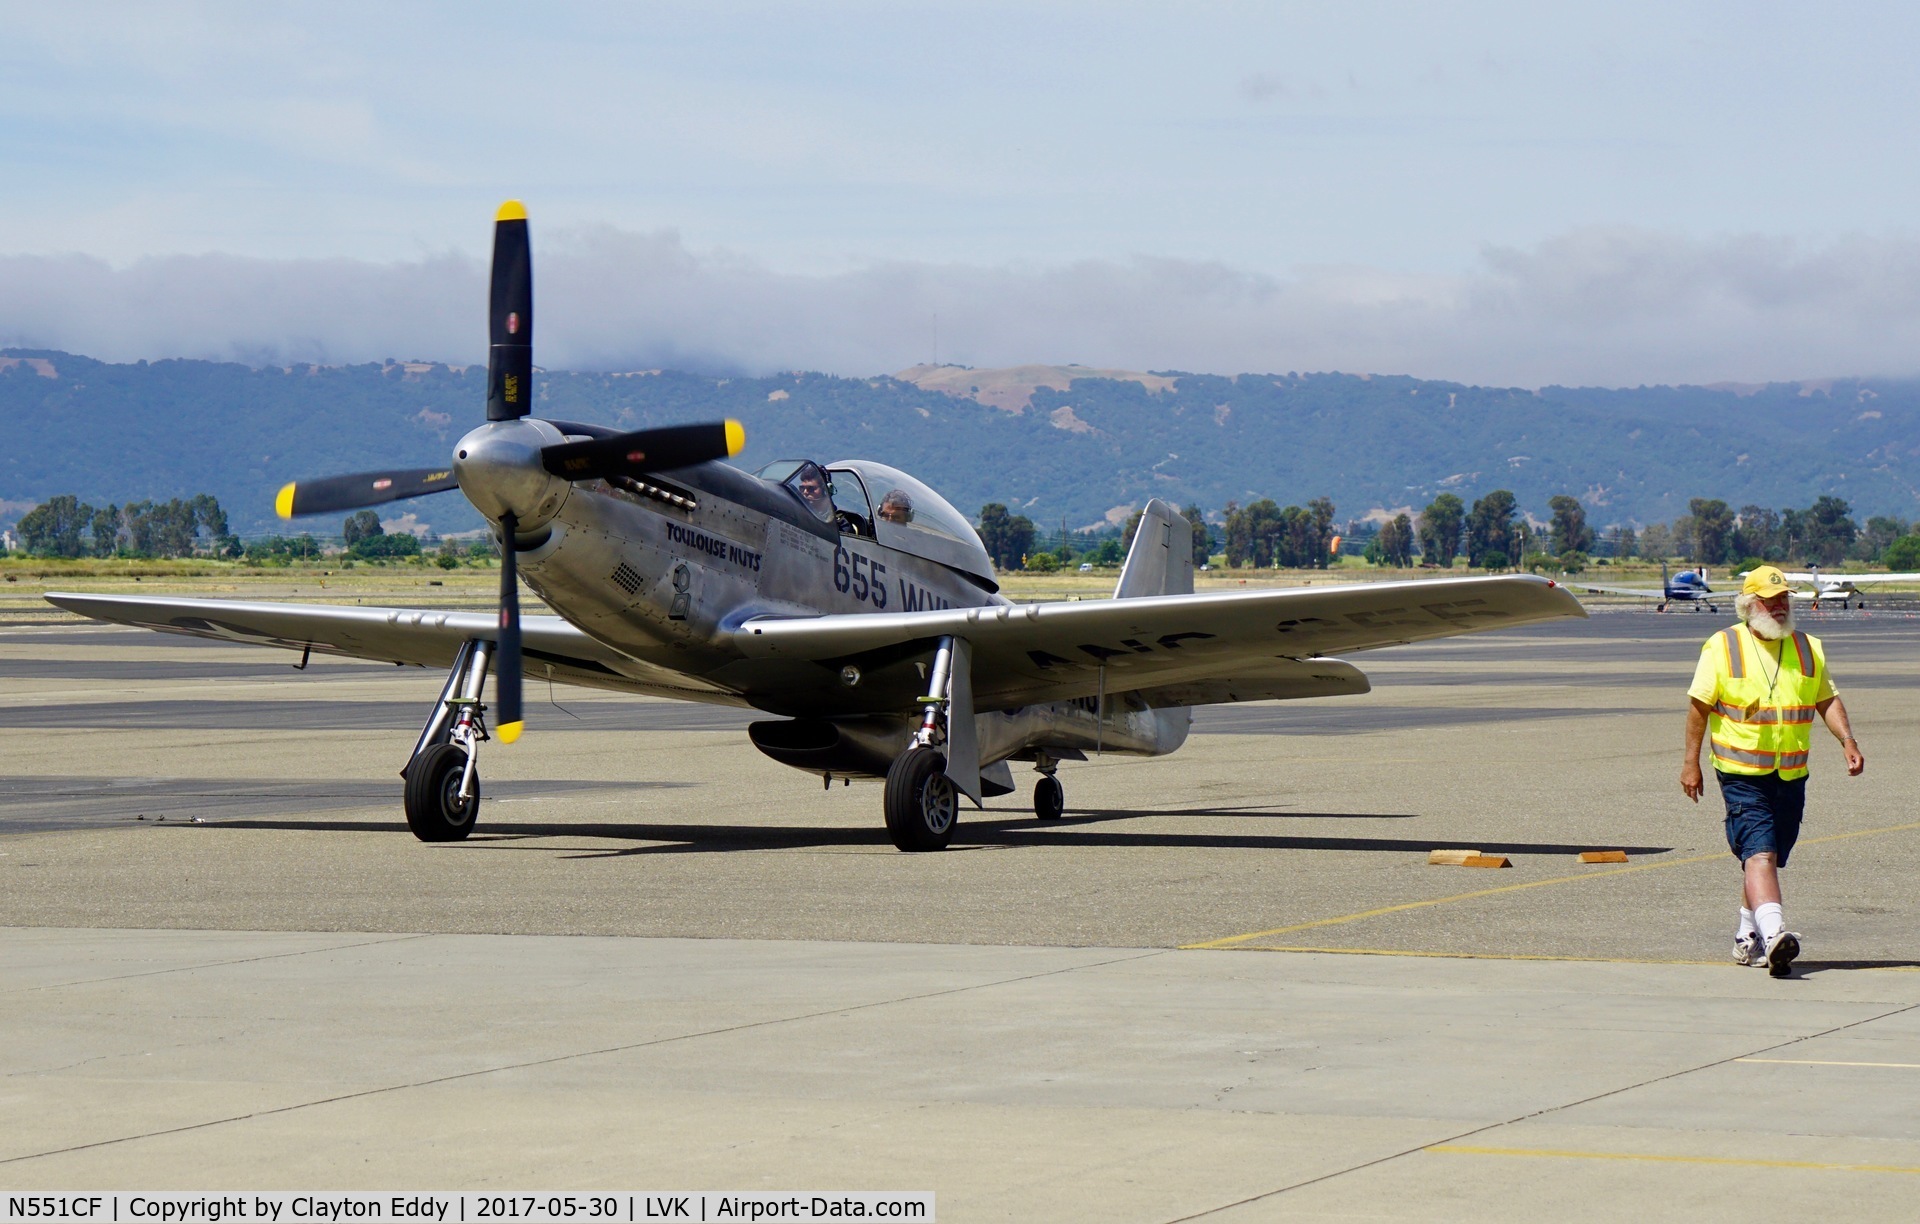 N551CF, 1944 North American TF-51D Mustang C/N 122-44511, Livermore Airport California 2017.